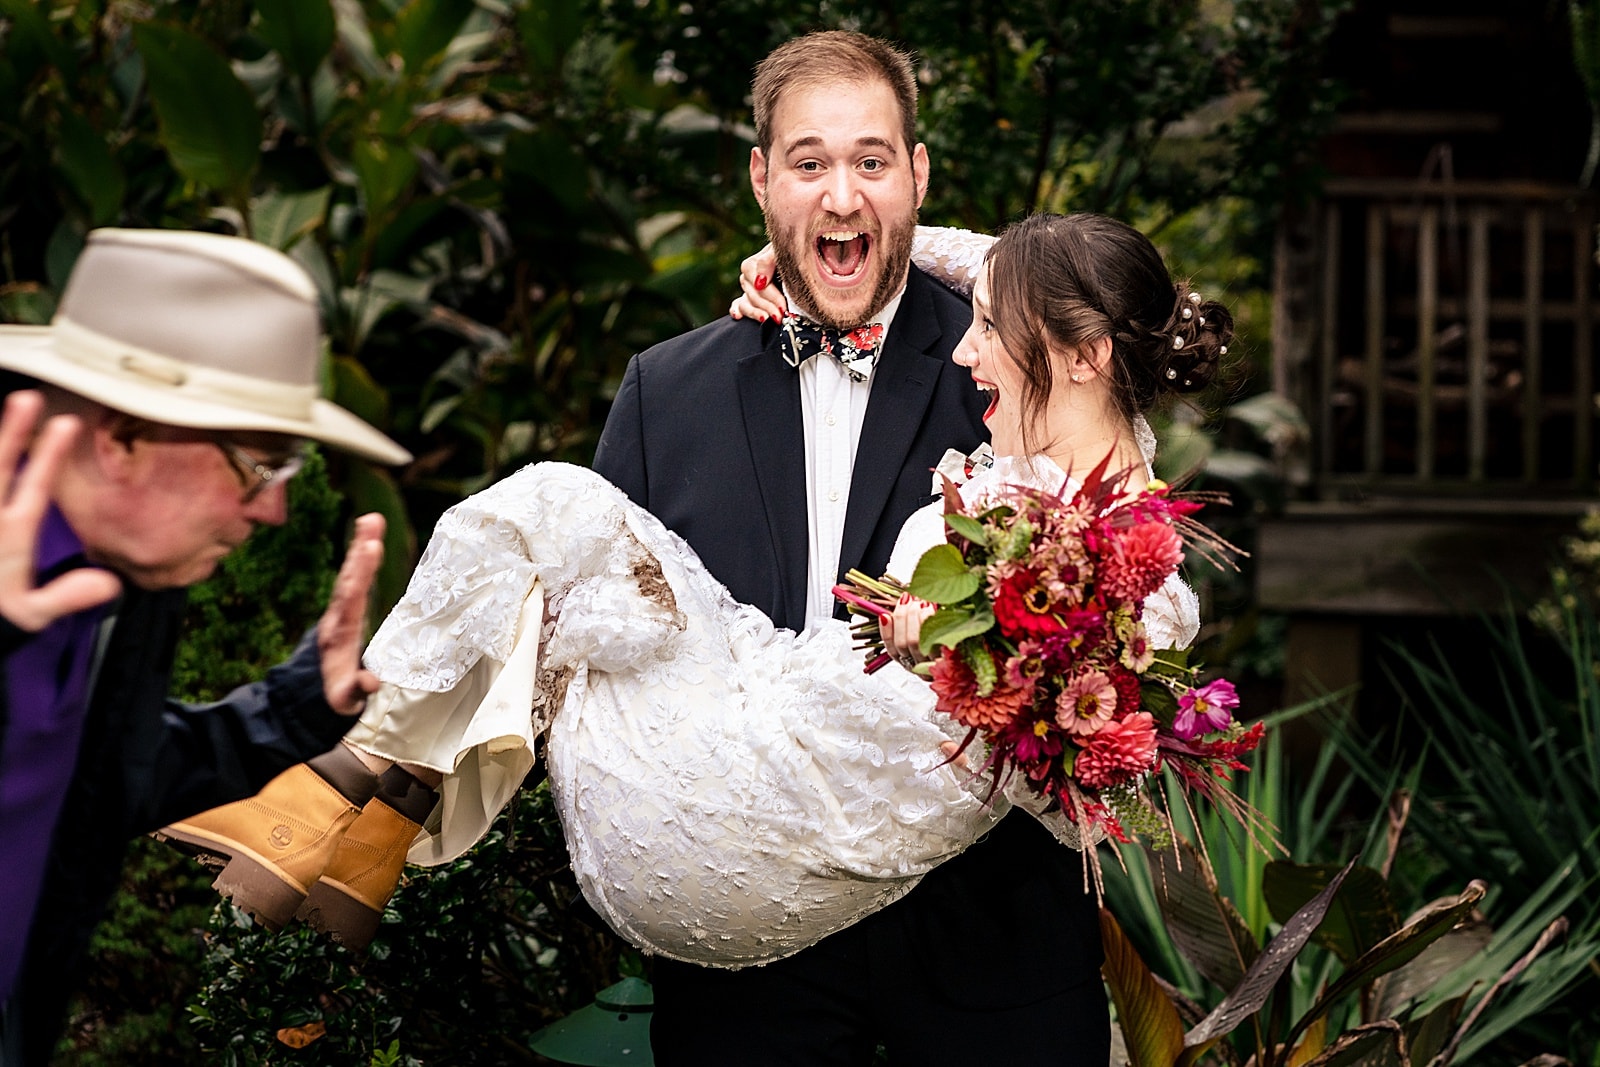 this couple had the most fun people in their wedding party!